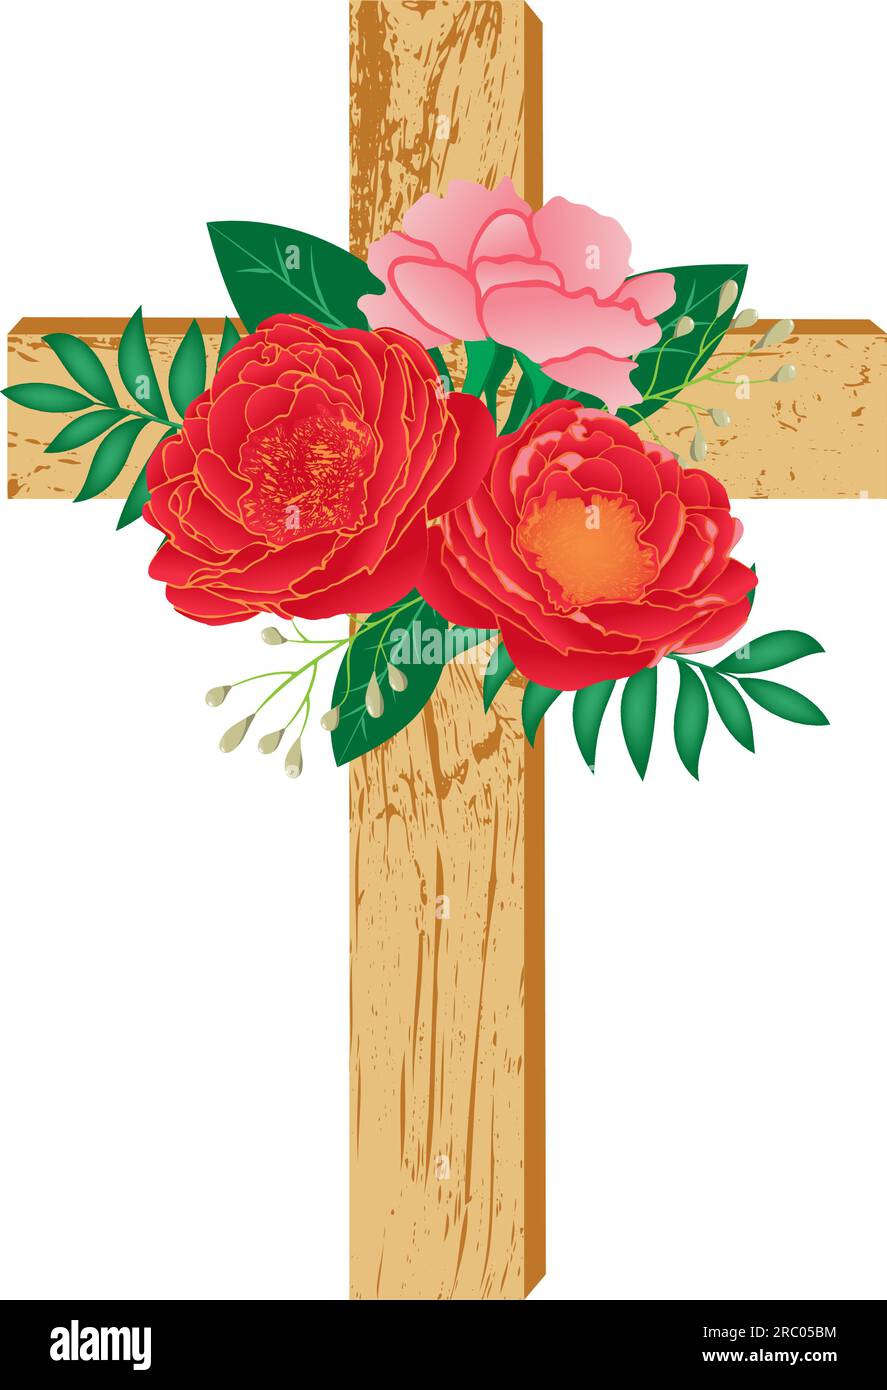 Baptism cross with red flowers. Wooden cross decorated with flowers and leaves. Vector illustration. Stock Vector